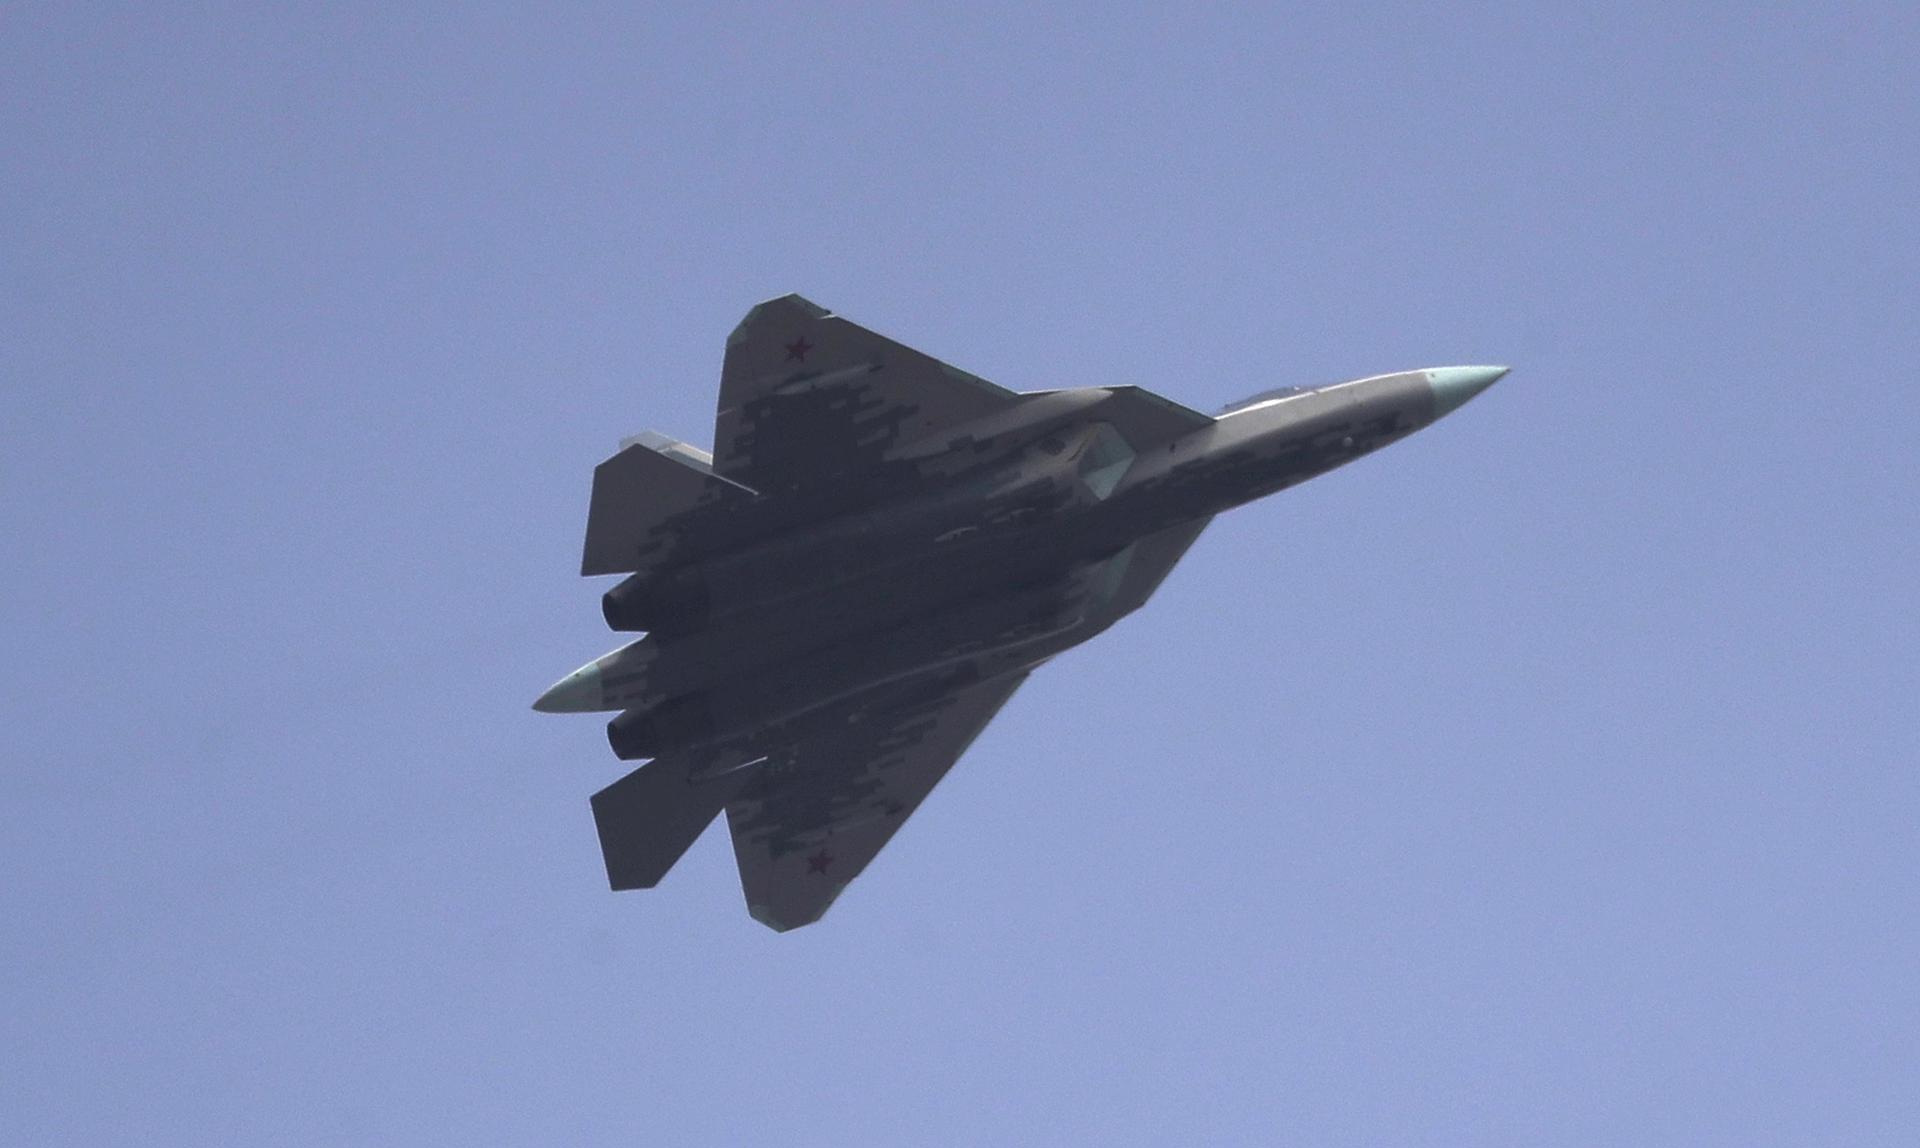 (FILE) A Russian Air Force Sukhoi Su-57 fifth-generation fighter jet flys over town of Podolsk outside Moscow as the fighter jet takes part in a rehearsal for the Victory Day military parade at the Patriot Park in Alabino, Moscow region, Russia, 14 April 2021. EFE/EPA/MAXIM SHIPENKOV